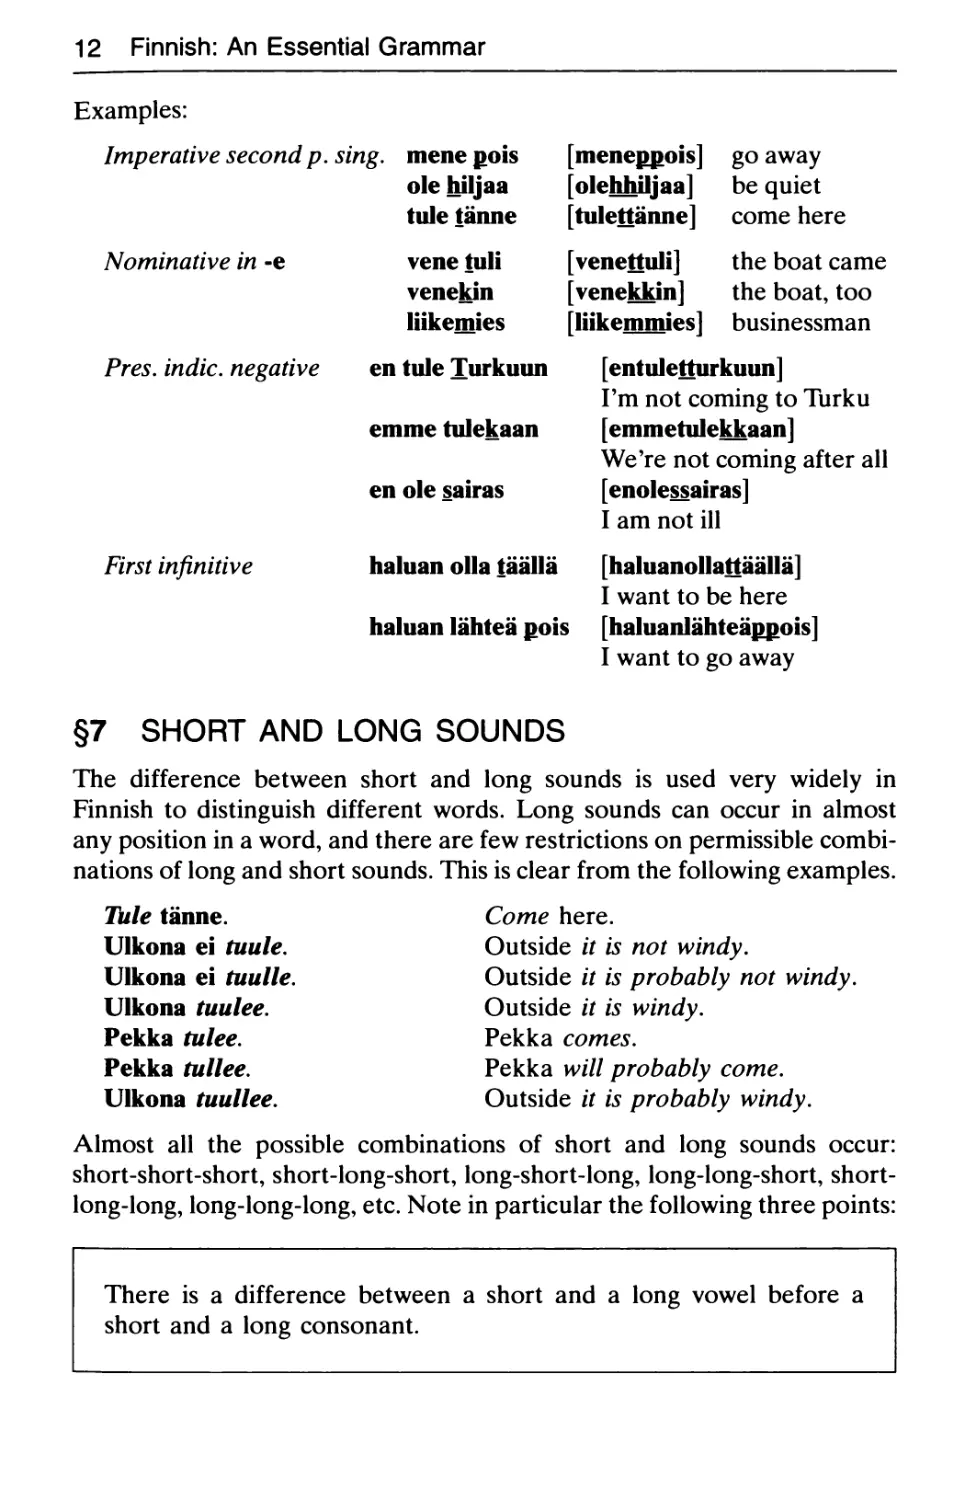 §7 Short and long sounds